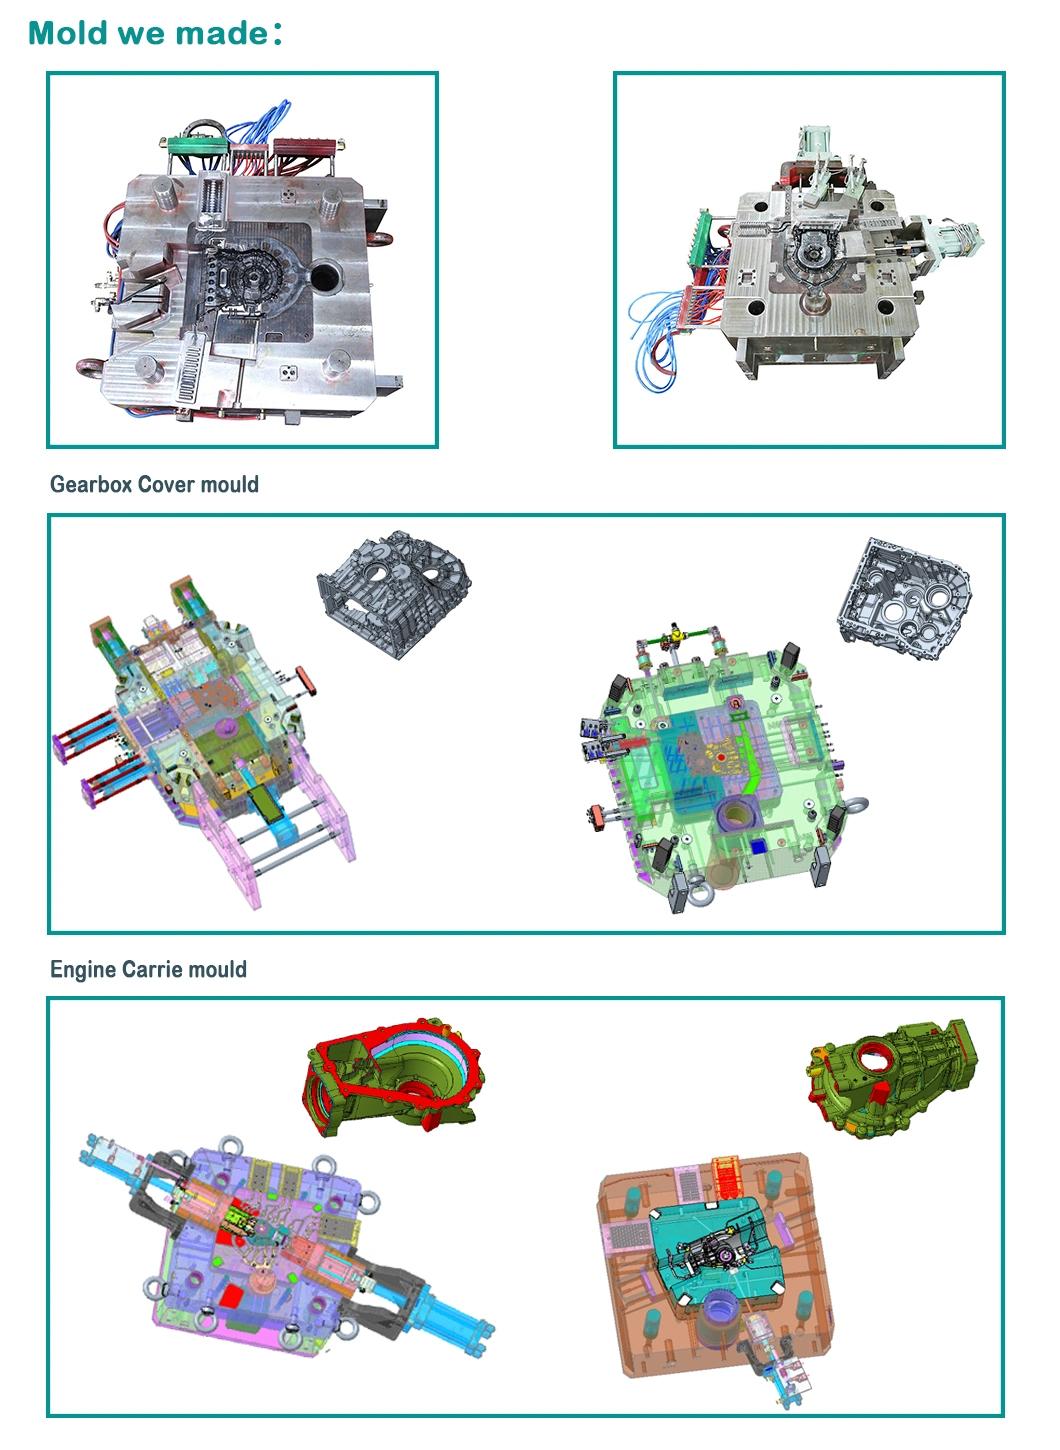 20 Years Free Sample High Quality Customized Cam Cover Die Casting Die Die Casting Mold in China for Automotive Telecommunication Electronic Household in China